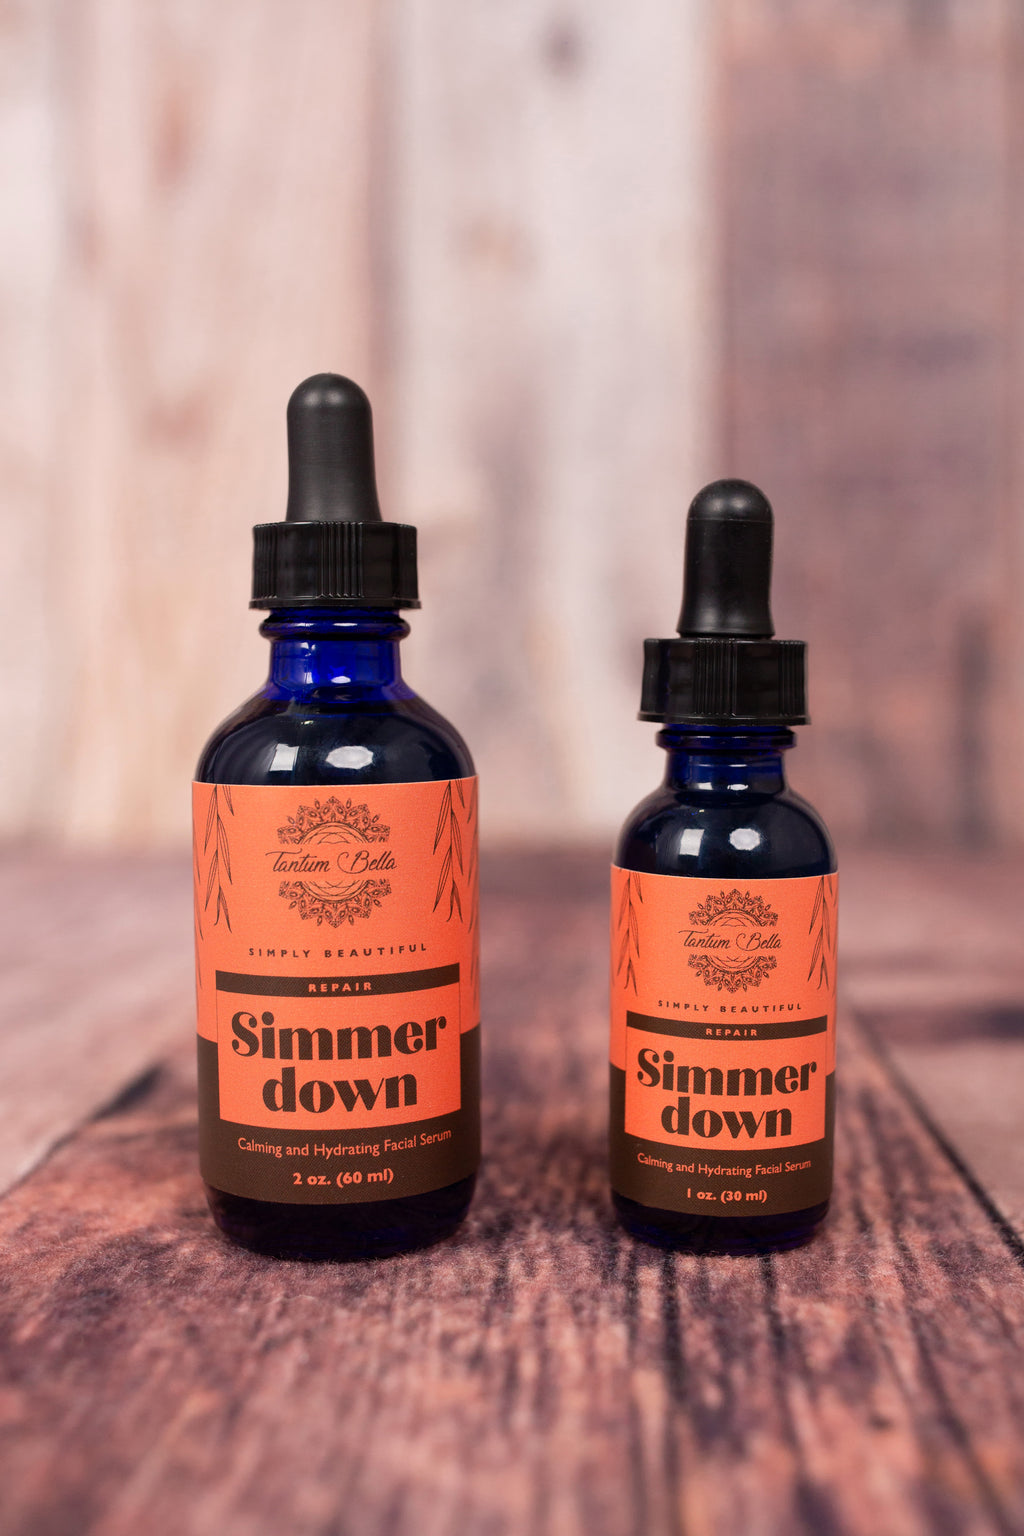 Simmer Down Calming Facial Serum - Now with Skin Smoothing Peptides!